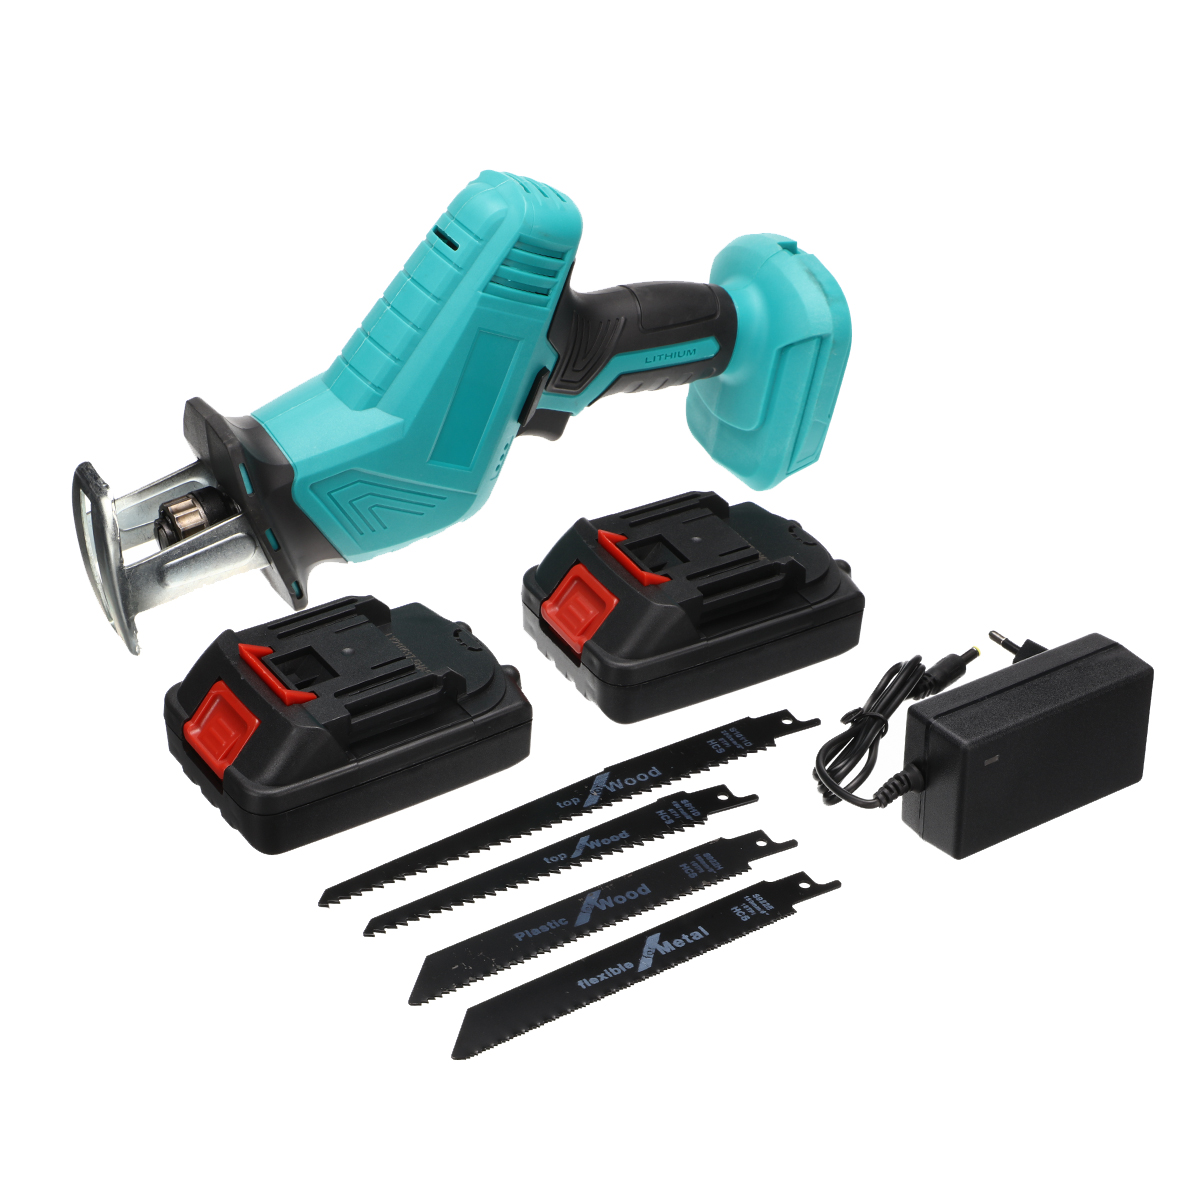 Cordless-Reciprocating-Saw-W-None12-Battery-For-Makita--4pcs-Saw-Blades-Woodworking-Wood-Cutter-Elec-1879913-9